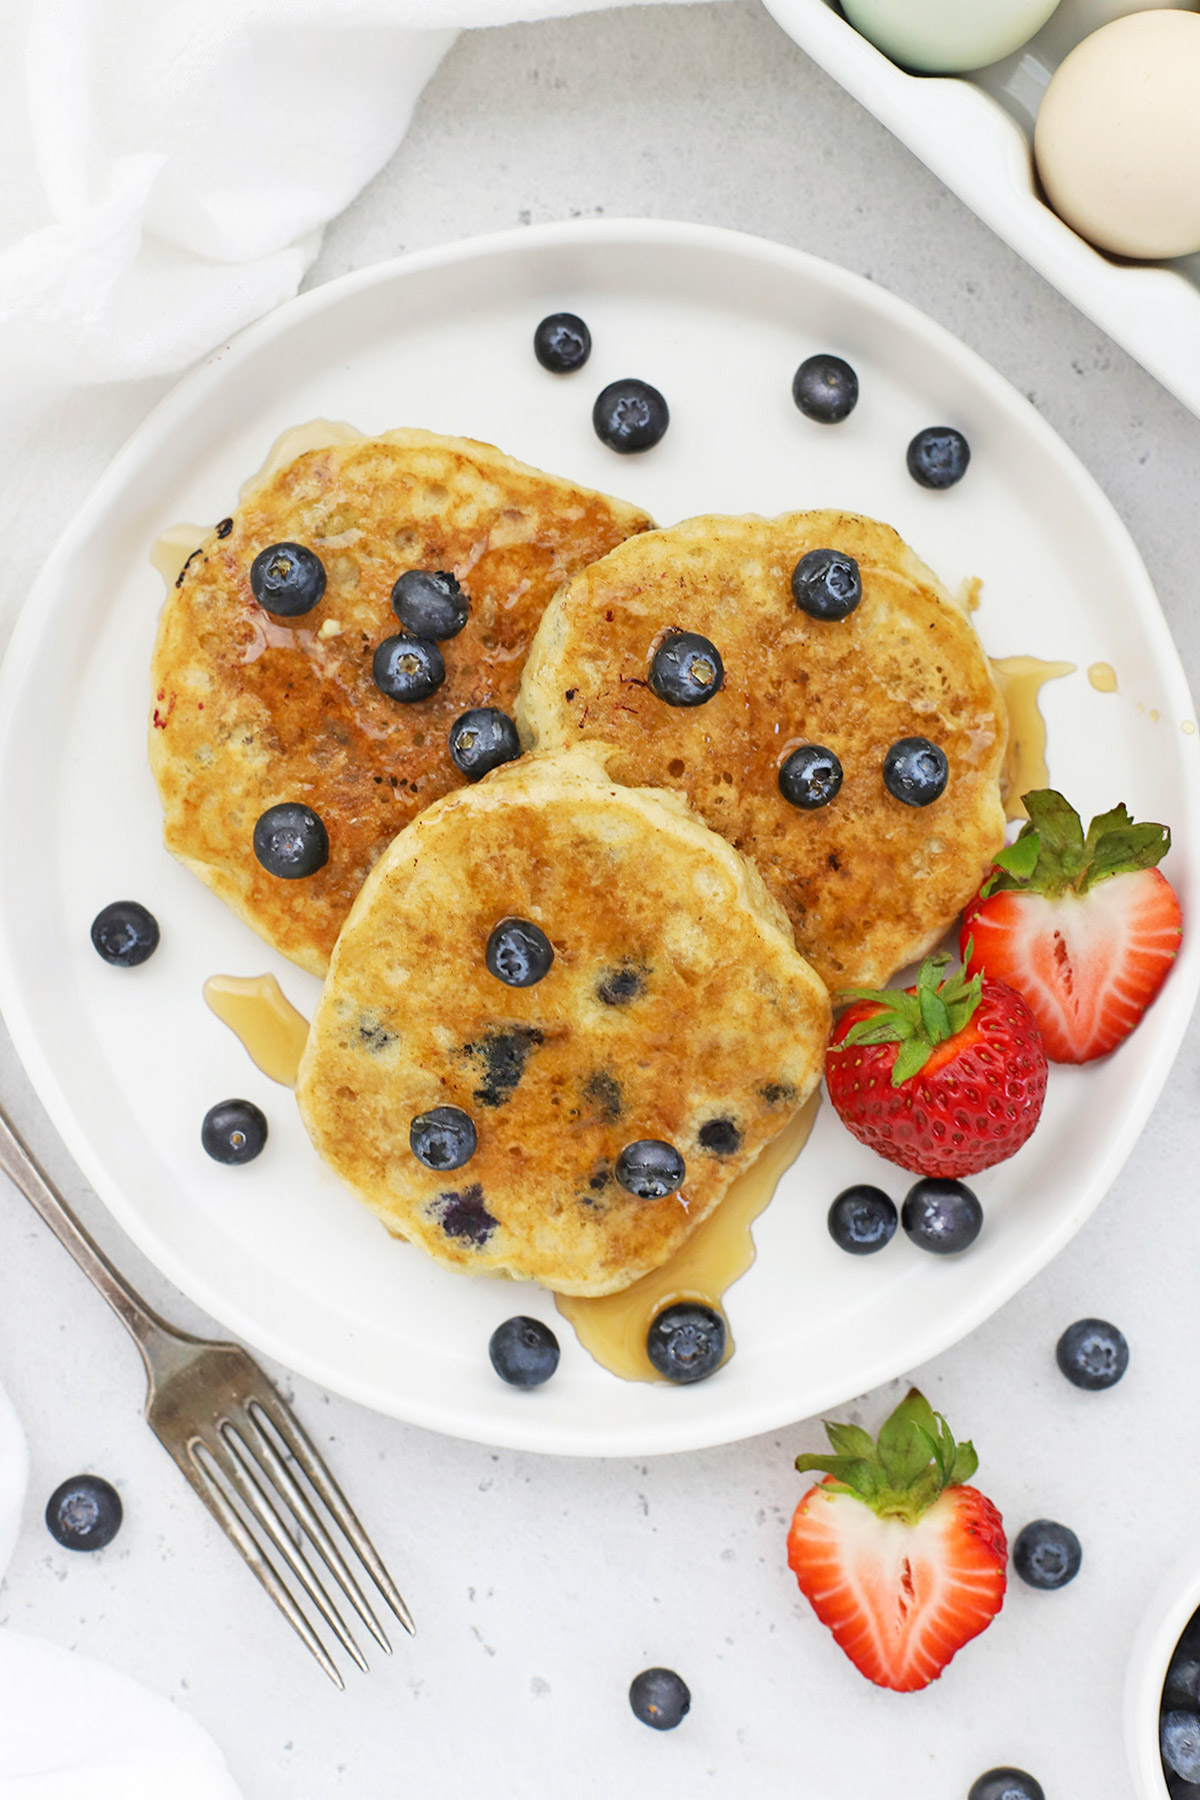 Overhead view of 3 fluffy gluten-free blueberry pancakes on a white plate drizzled with syrup